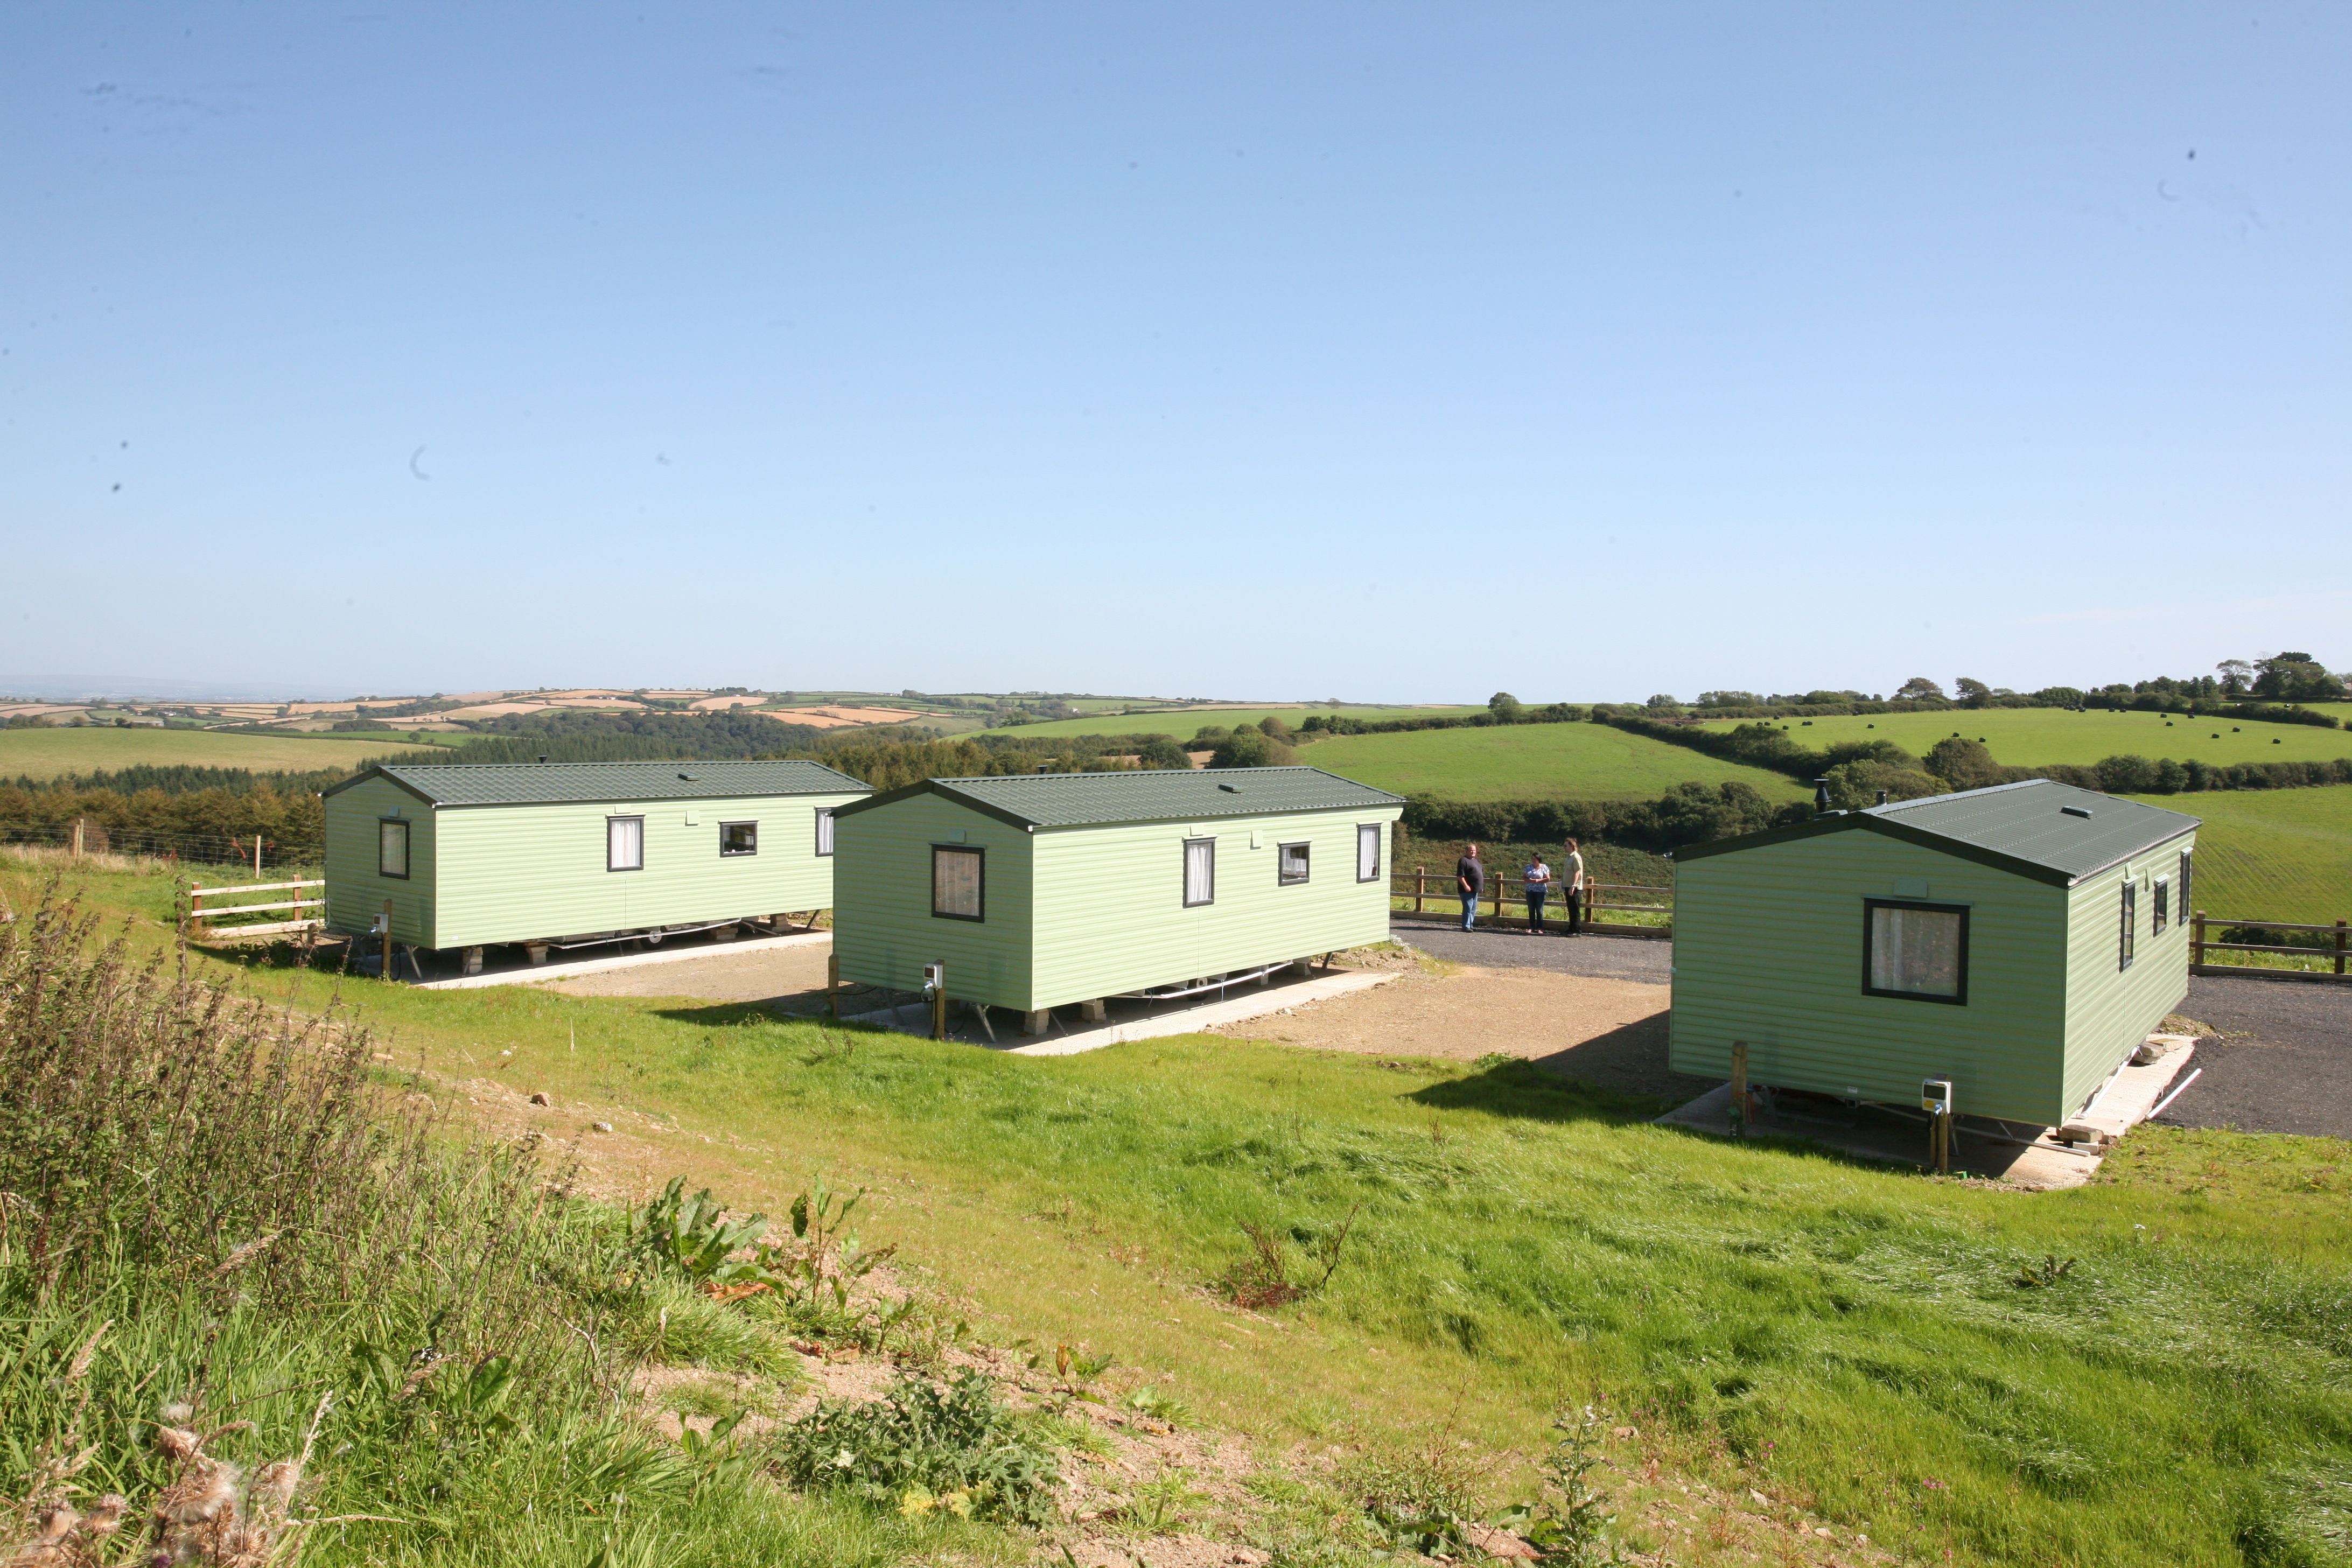 Polborder Farm is a small static caravan site near Looe in Cornwall, with just three static caravans that are rented out to holidaymakers